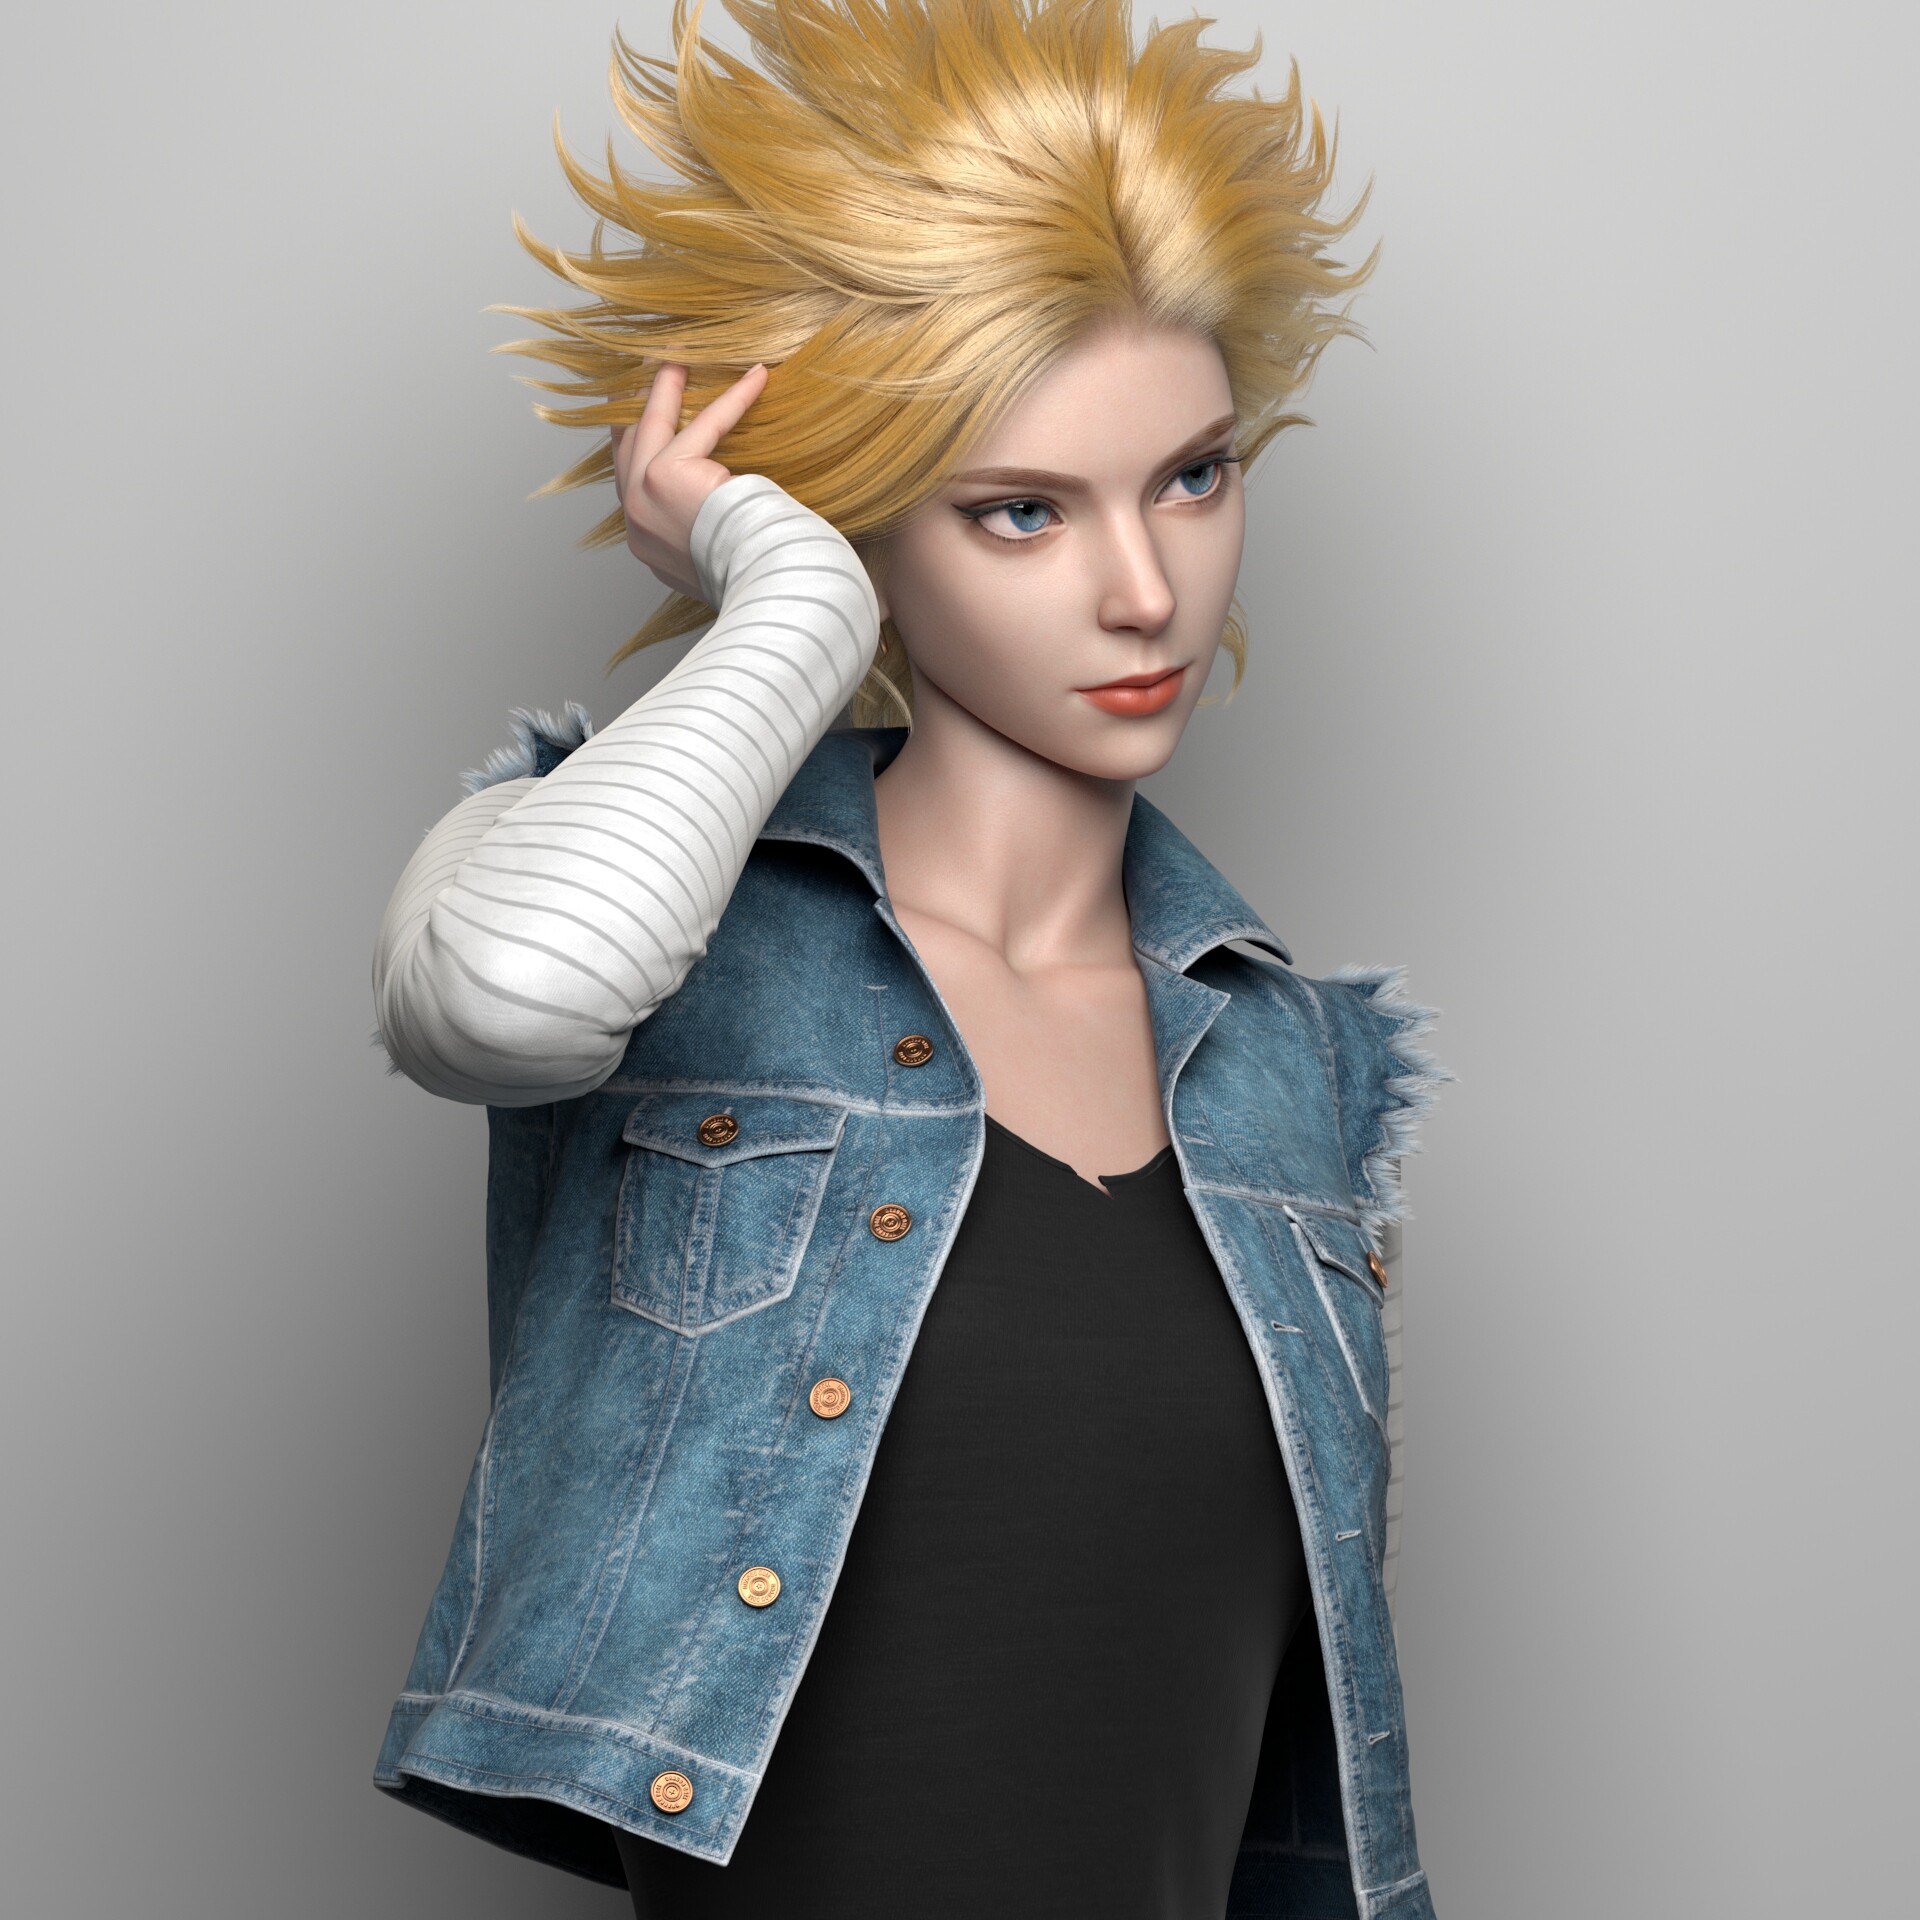 General 1920x1920 women ArtStation digital art blue eyes red lipstick gray background simple background Android 18 Dragon Ball